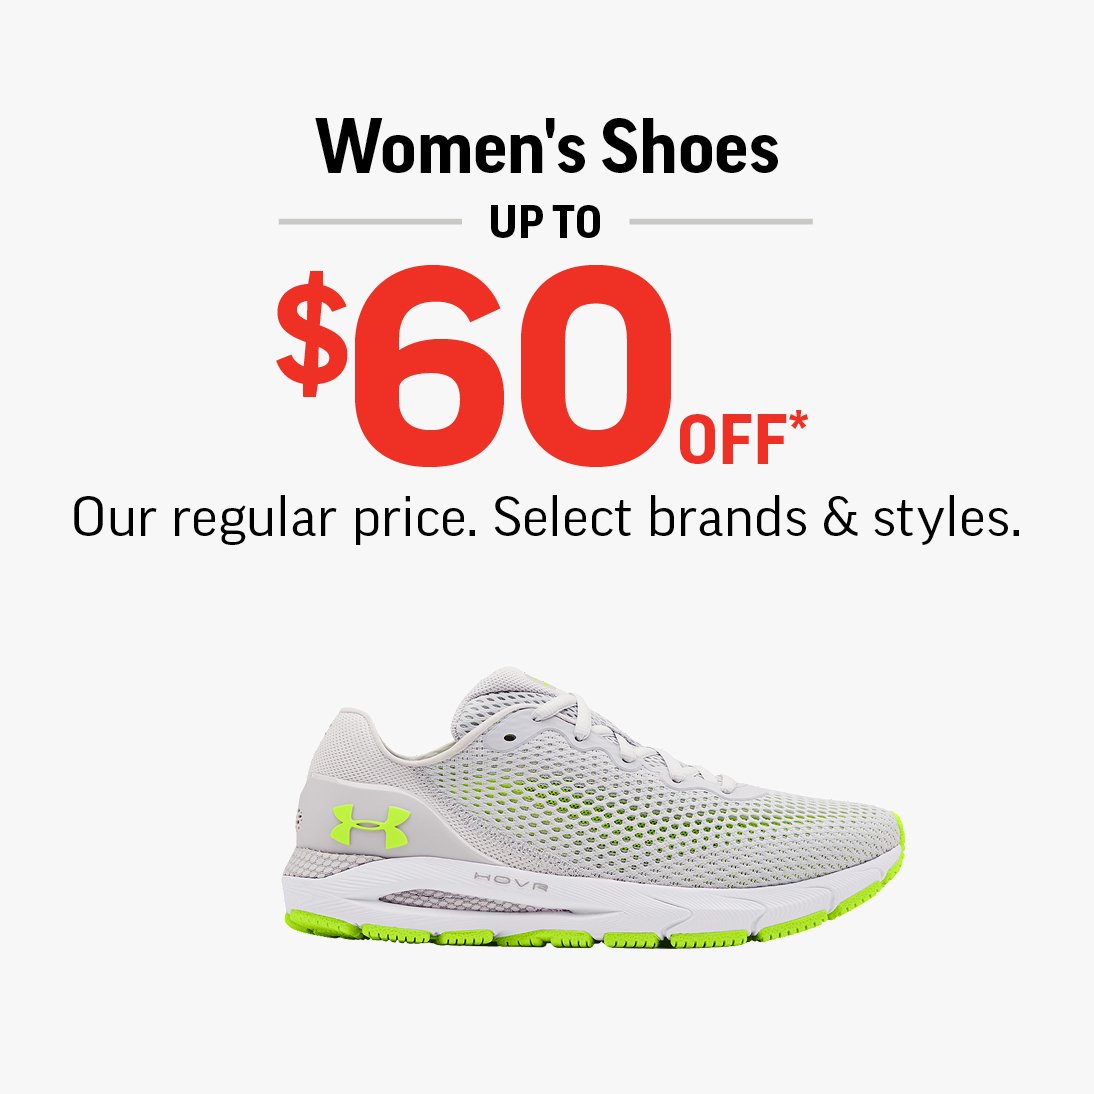 WOMEN'S SHOES UP TO $60 OFF